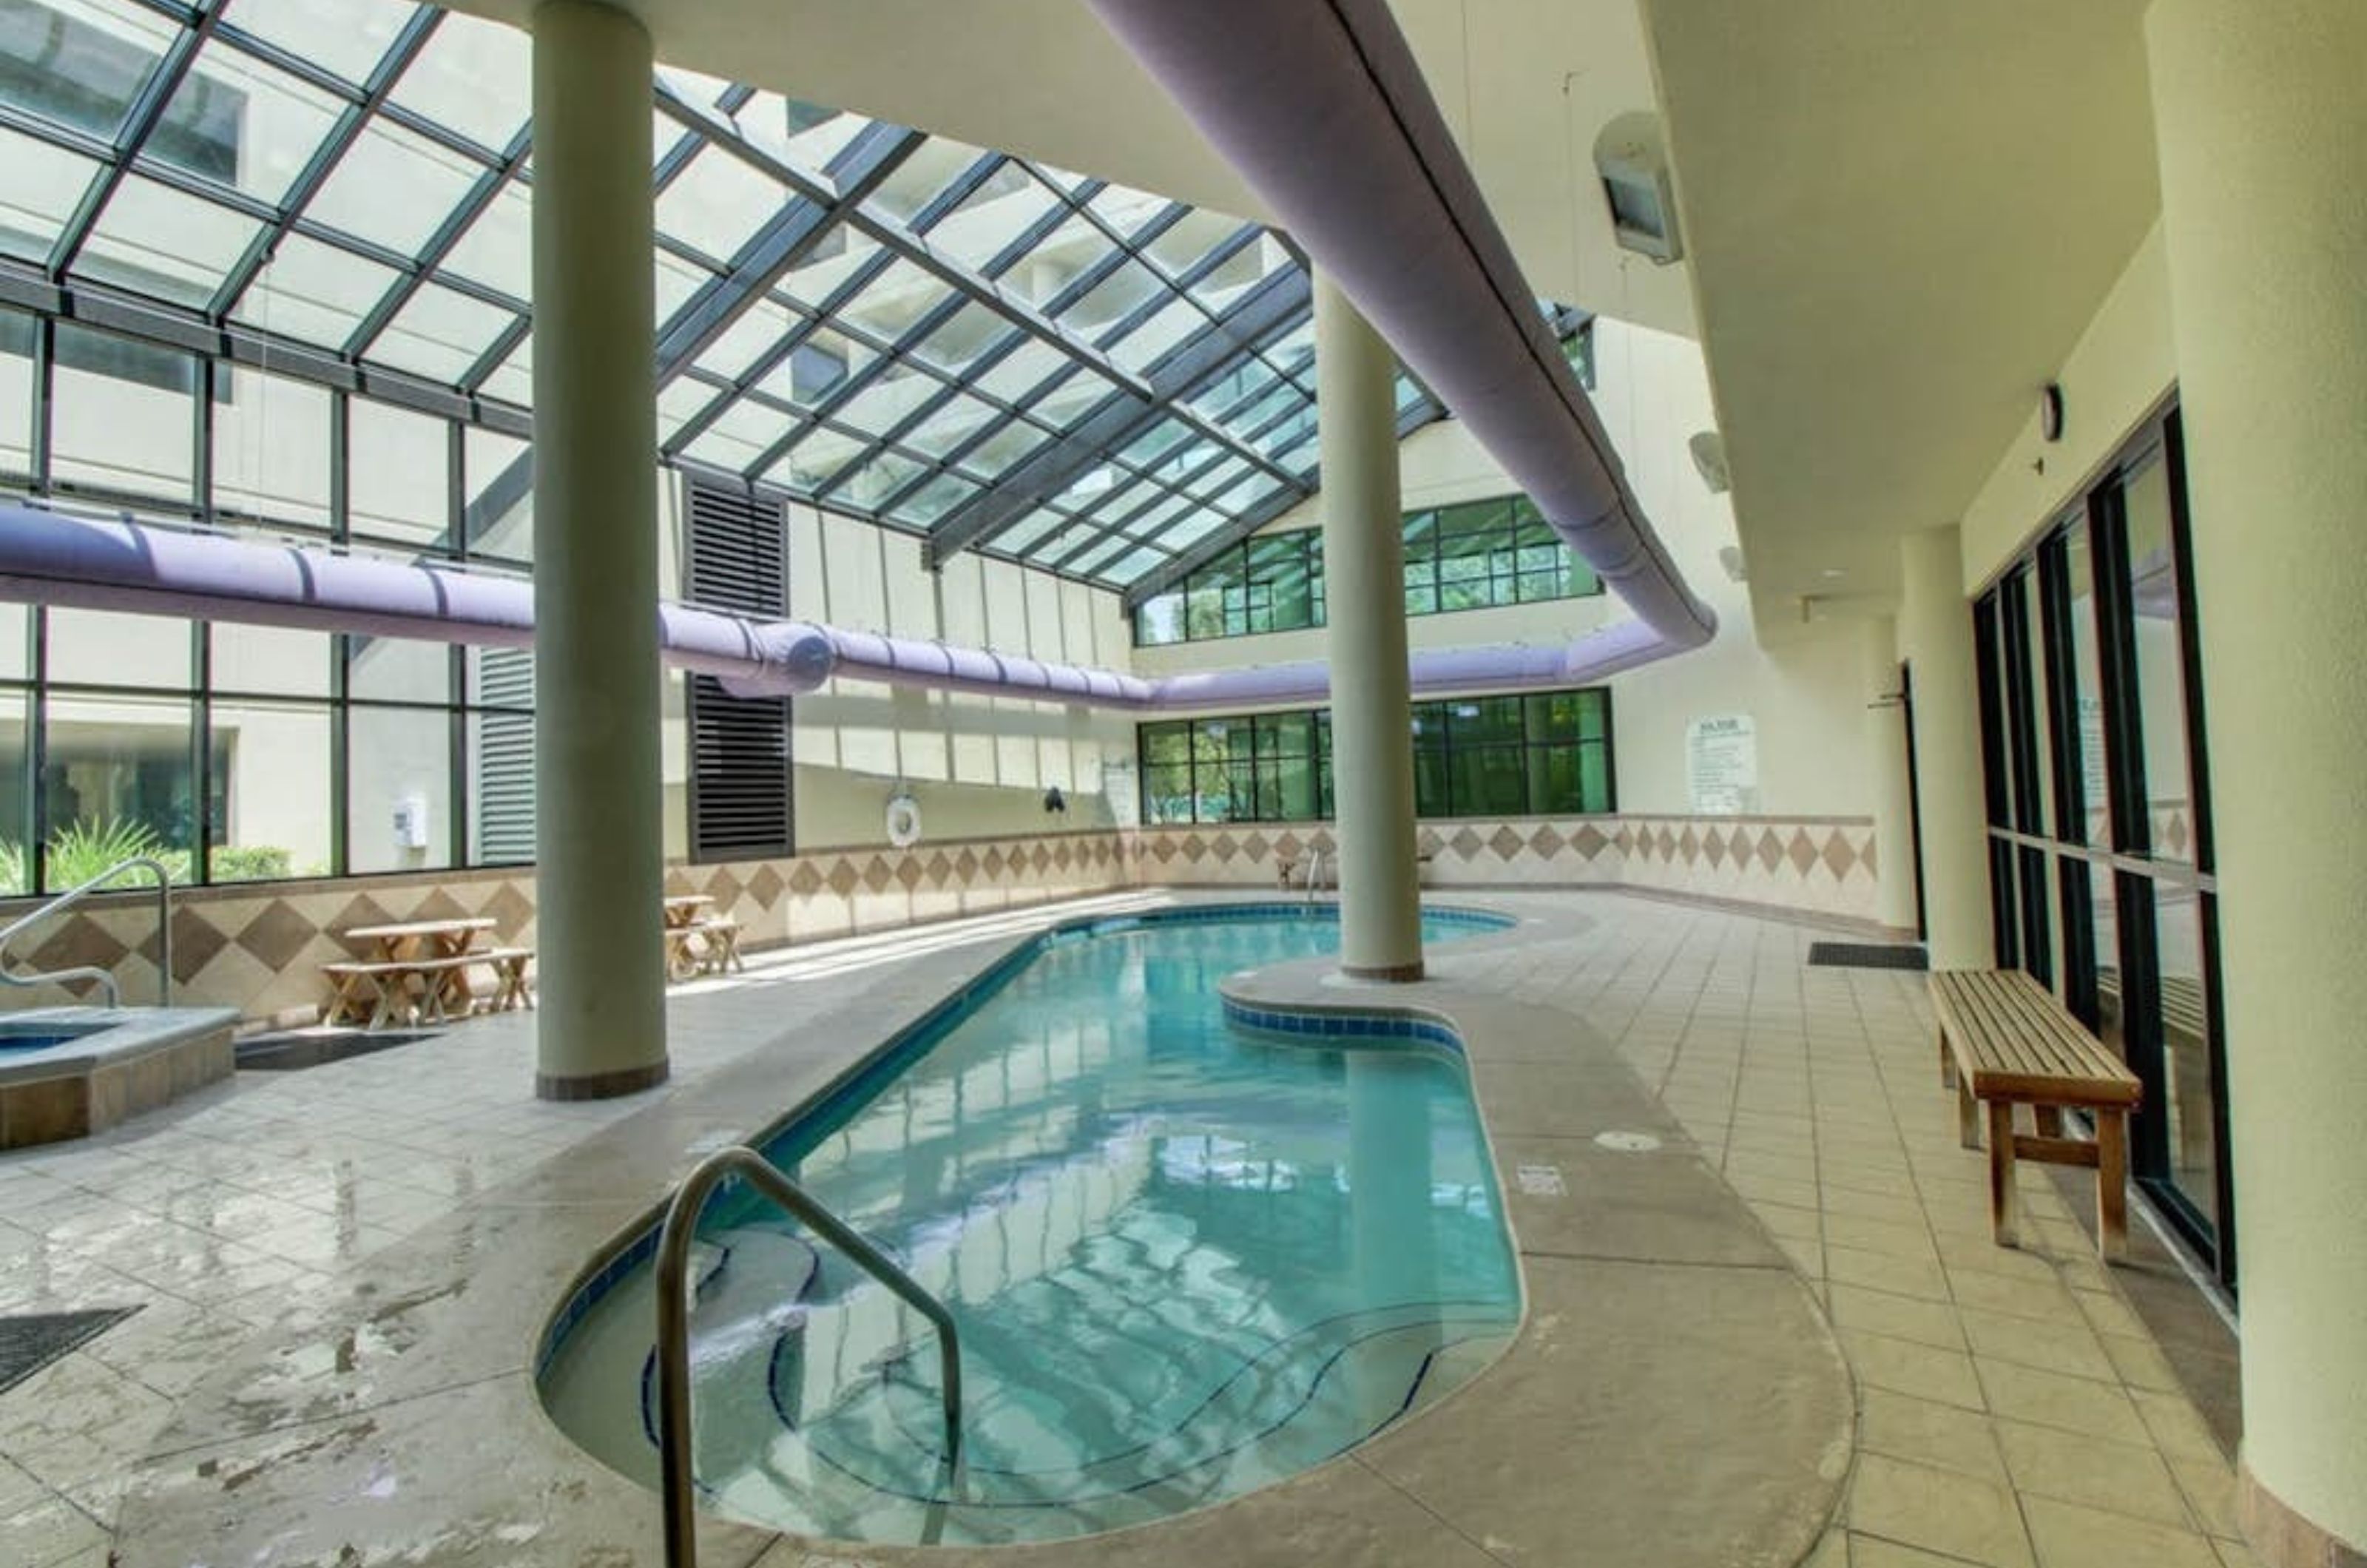 An indoor swimming pool with a spacious pool deck and windows